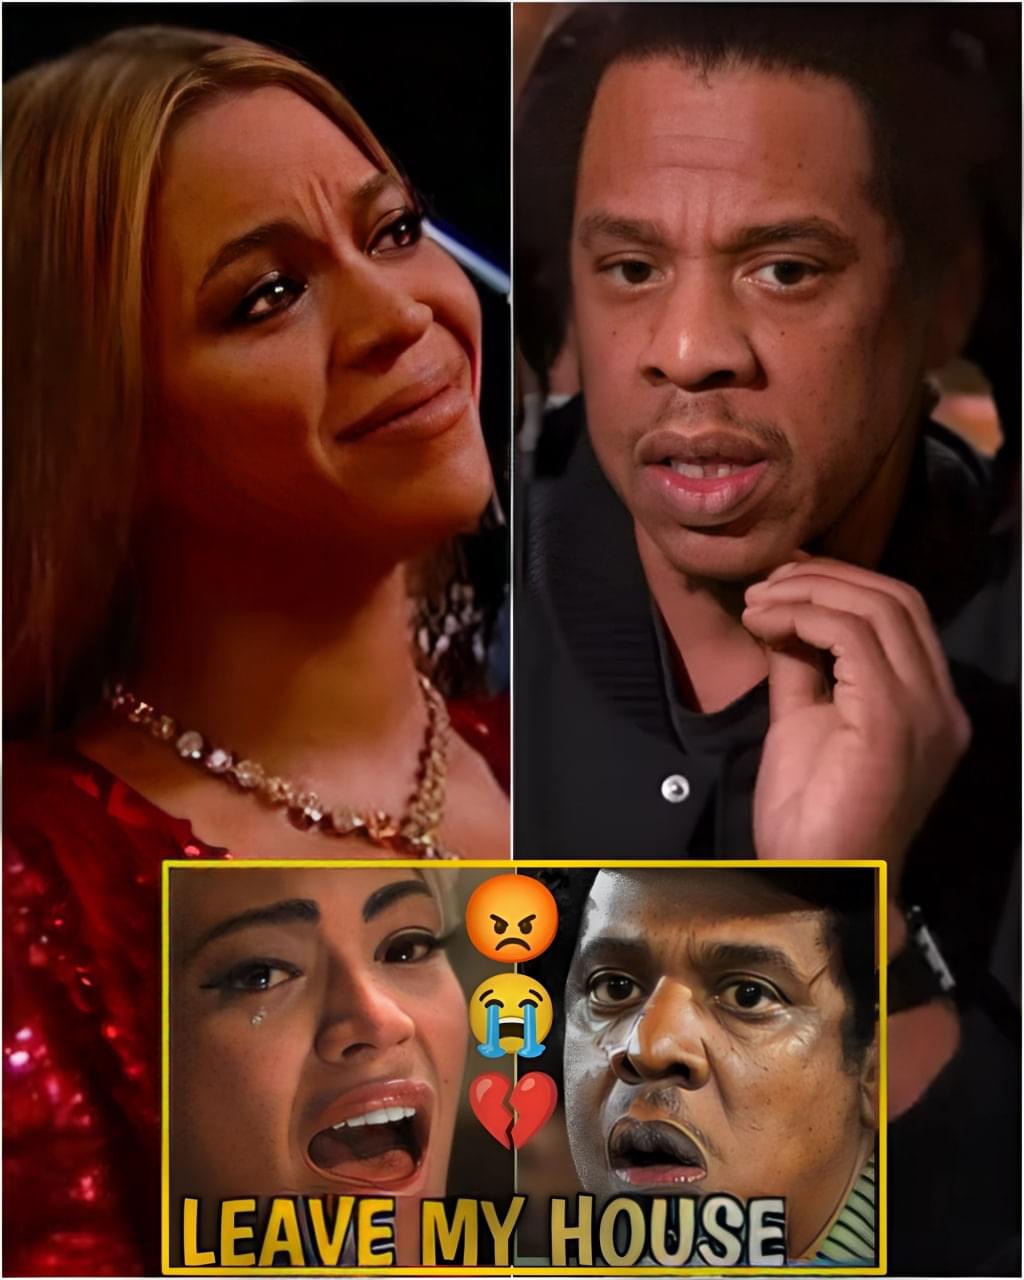 Beyonce Breakdown In Tears After She Ask Jay-Z To Leave Her House During The Divorce Process